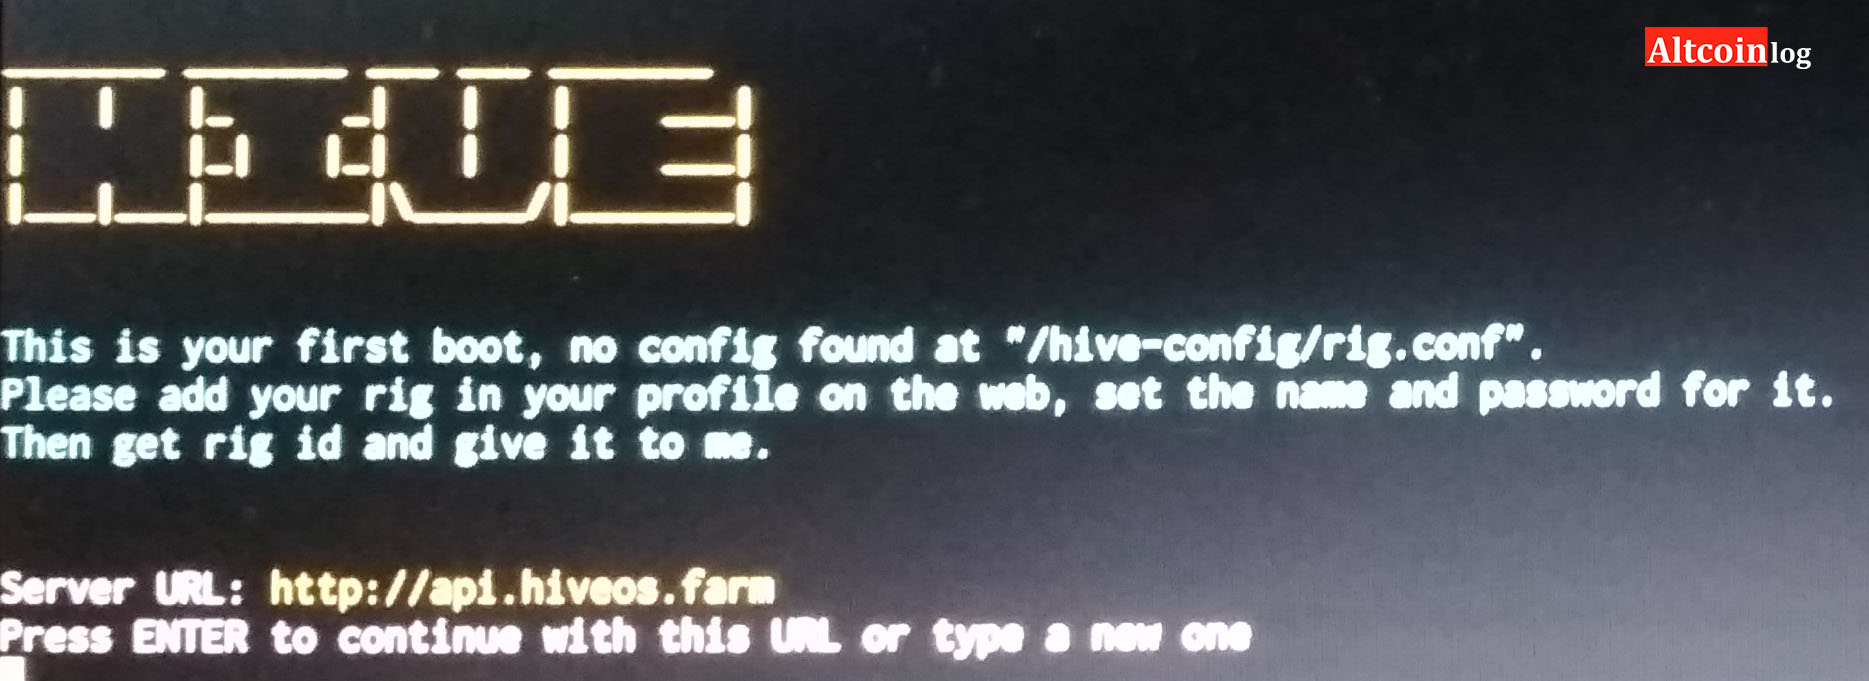 Hive OS - installation and configuration of an operating system for mining